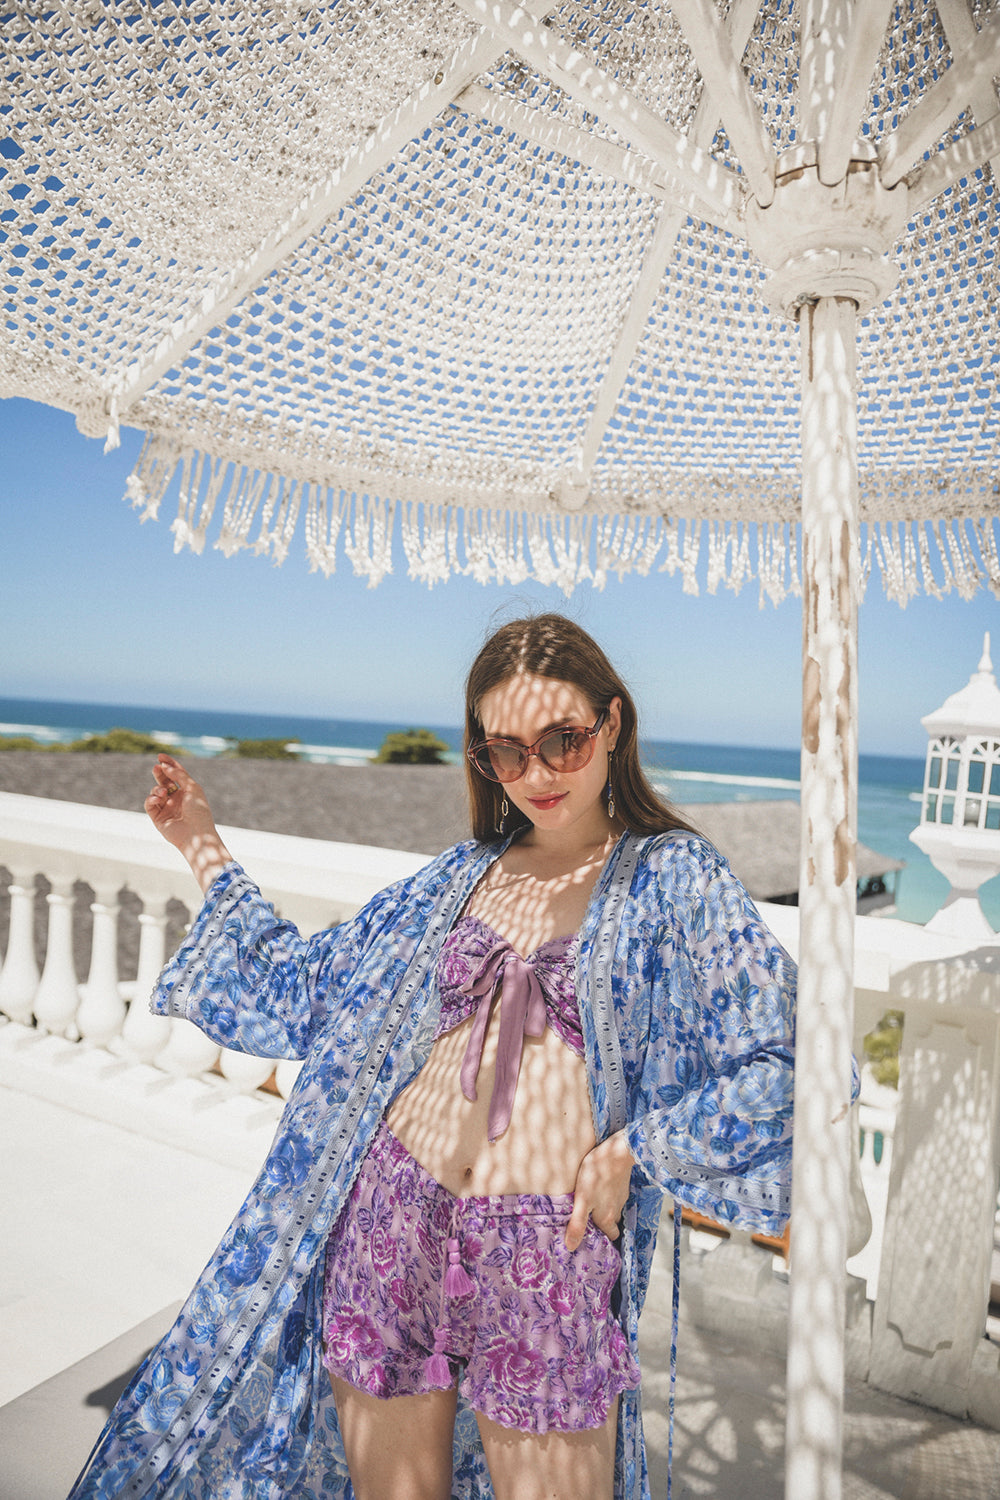 Wrap yourself in comfort and style with the Peony Long Robe, a modern boho kimono designed by Tulle and Batiste and ethically handmade by Balinese artisans